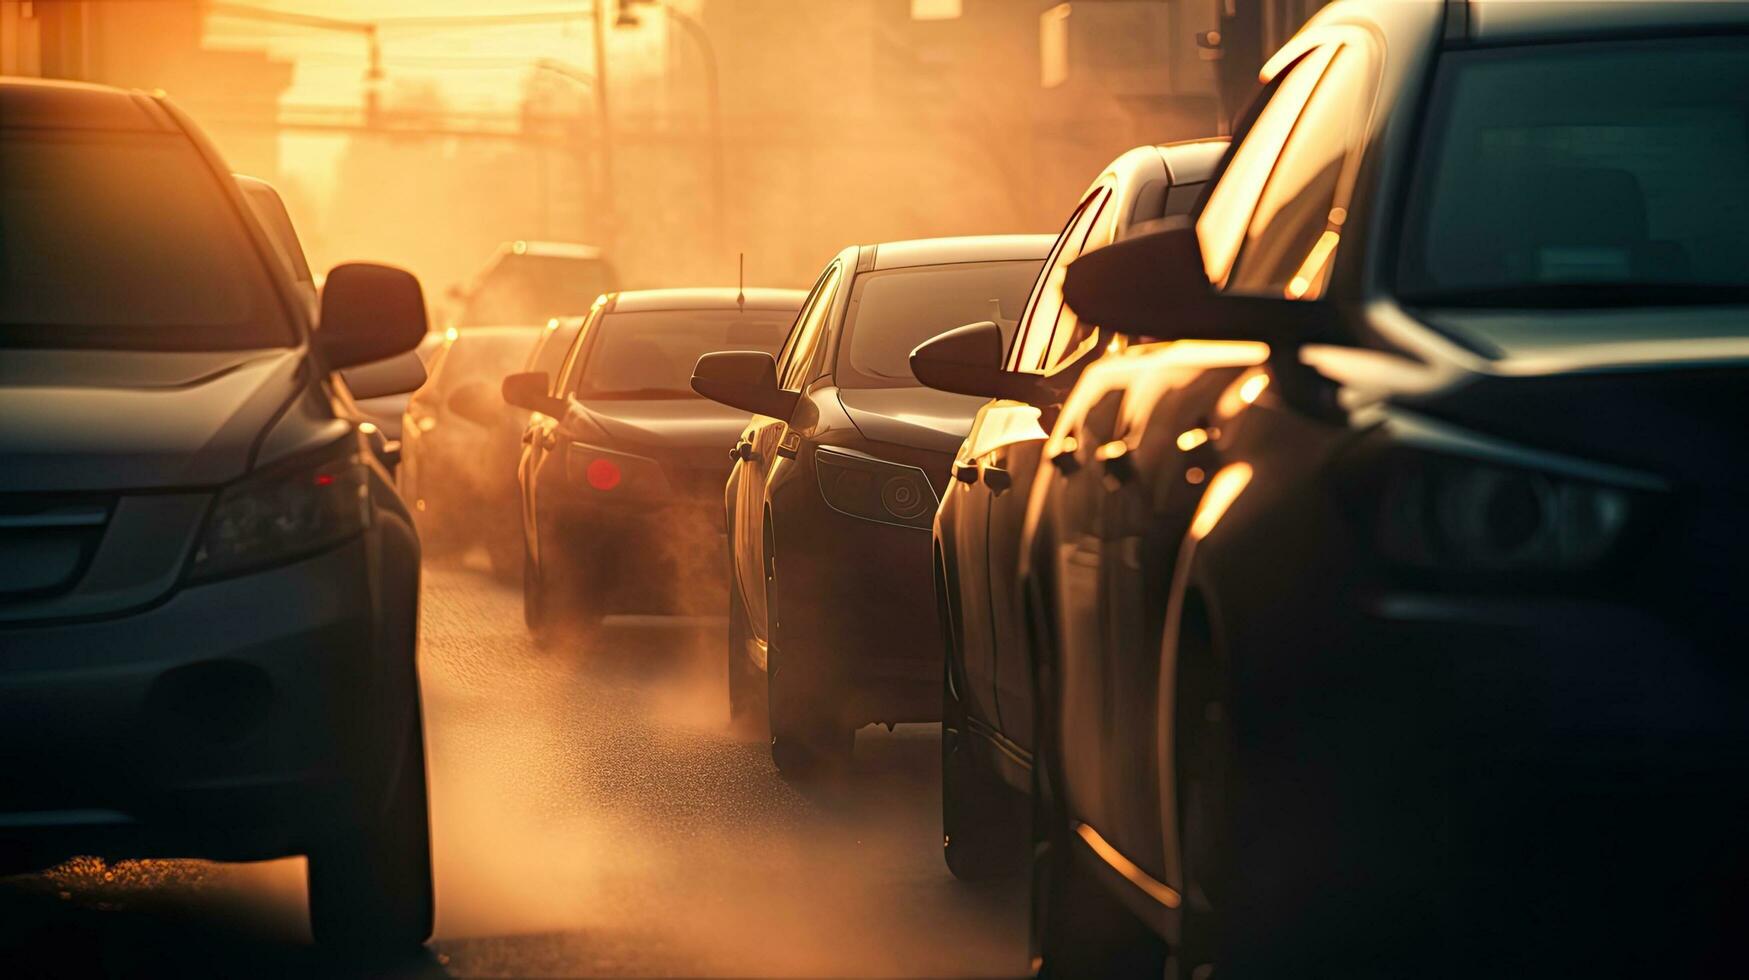 Cars in a traffic jam seen through steamy exhaust pipes photo